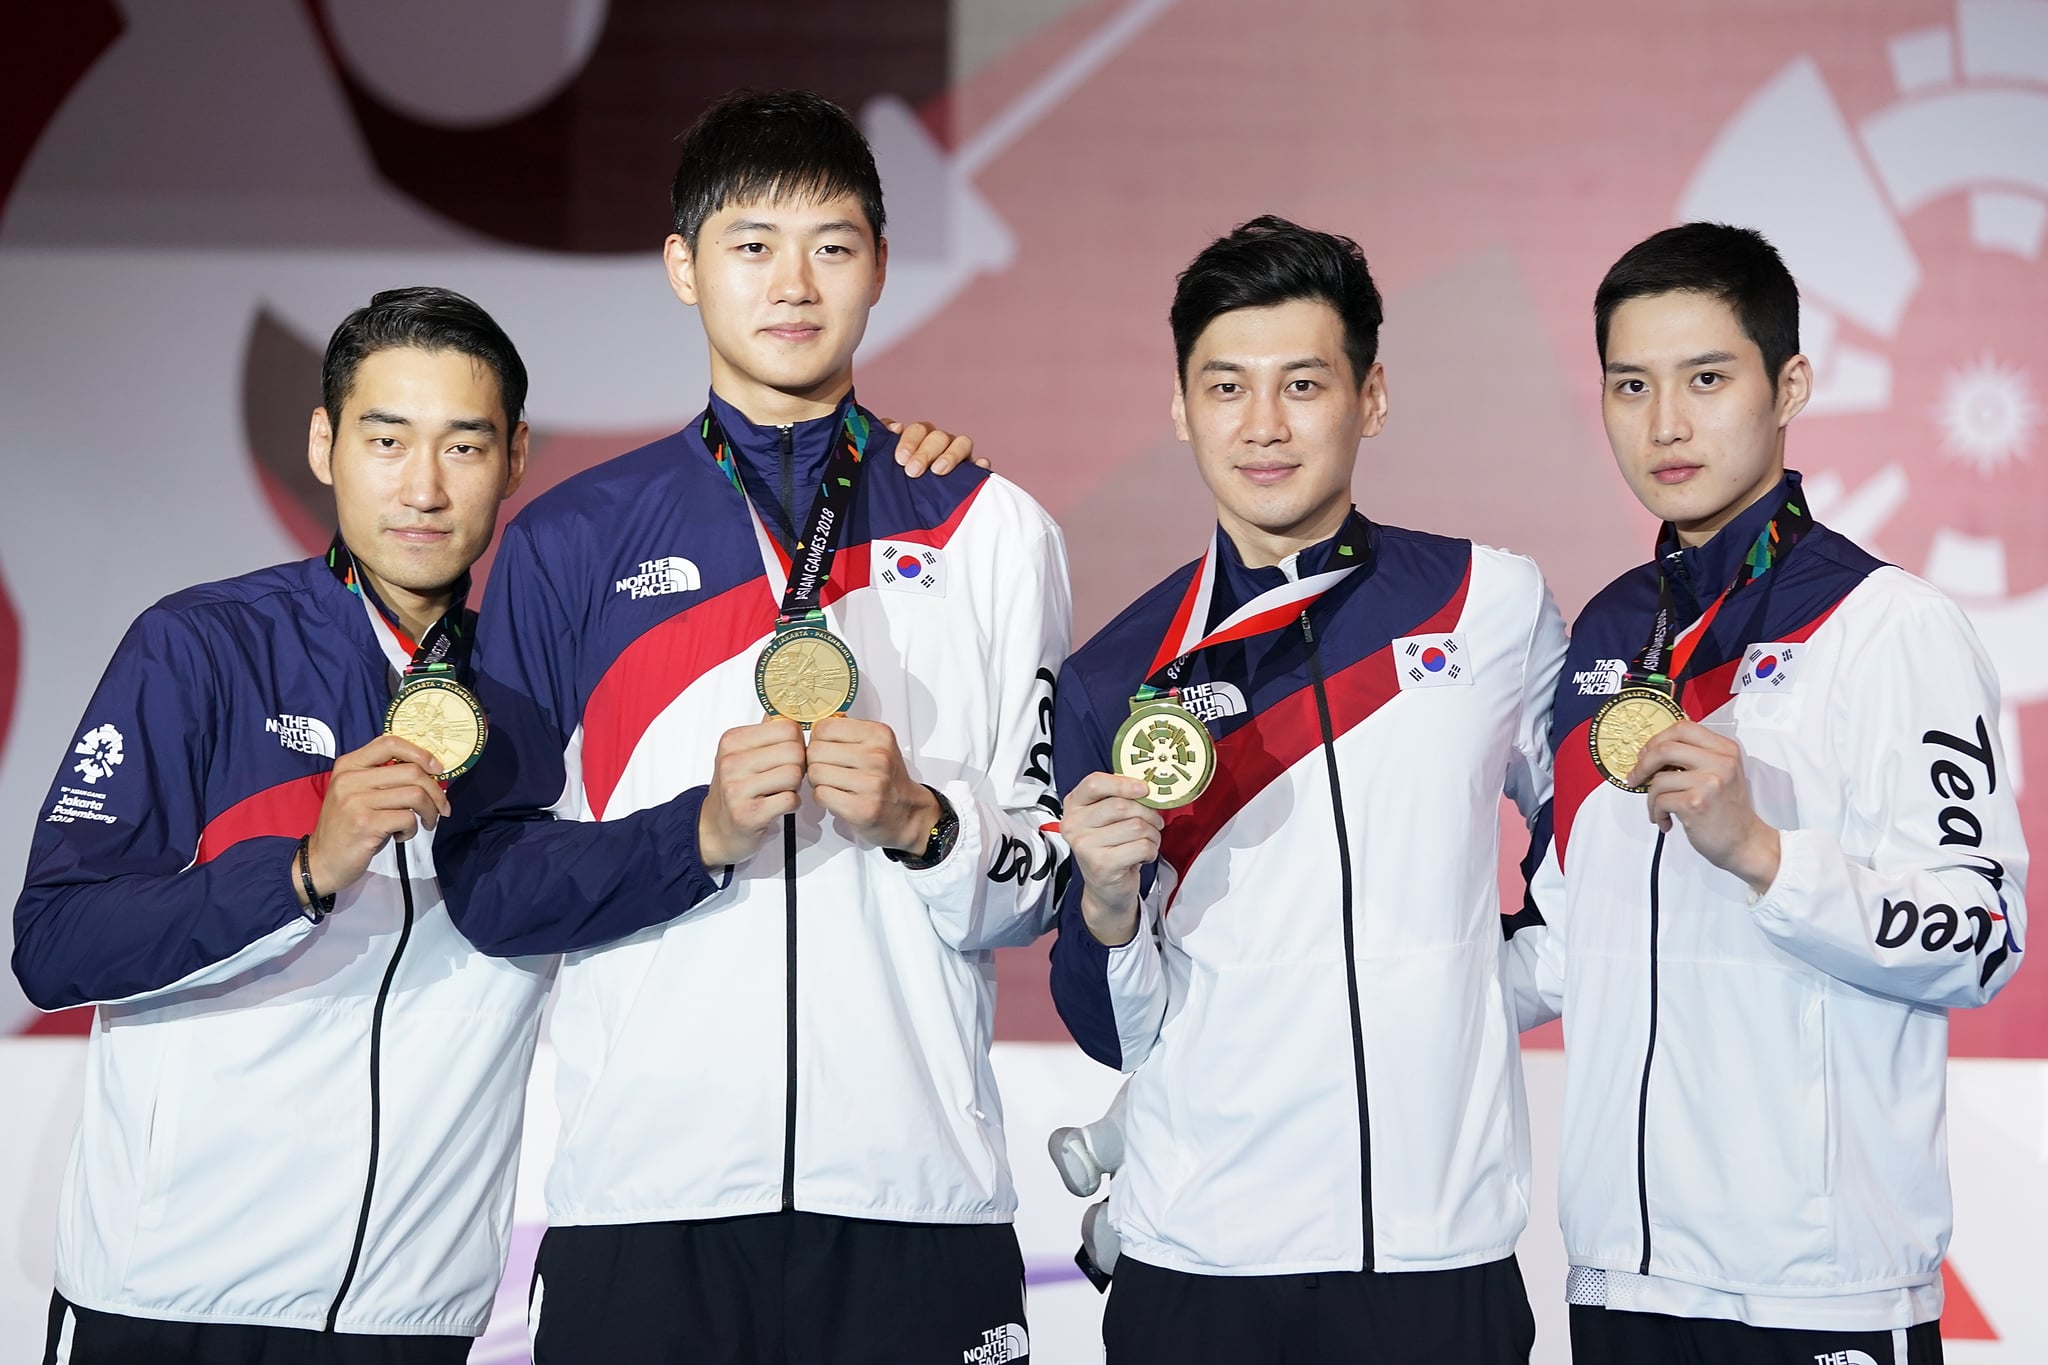 JAKARTA, INDONESIA - AUGUST 23:  Sanguk Oh;  Bongil Gu; Junho Kim and Bongil Gu of Korea pose on the podium during the awards ceremony in Fencing Men's team foil final match on day five of the Asian Games on August 23, 2018 in Jakarta, Indonesia.  (Photo by Lintao Zhang/Getty Images)